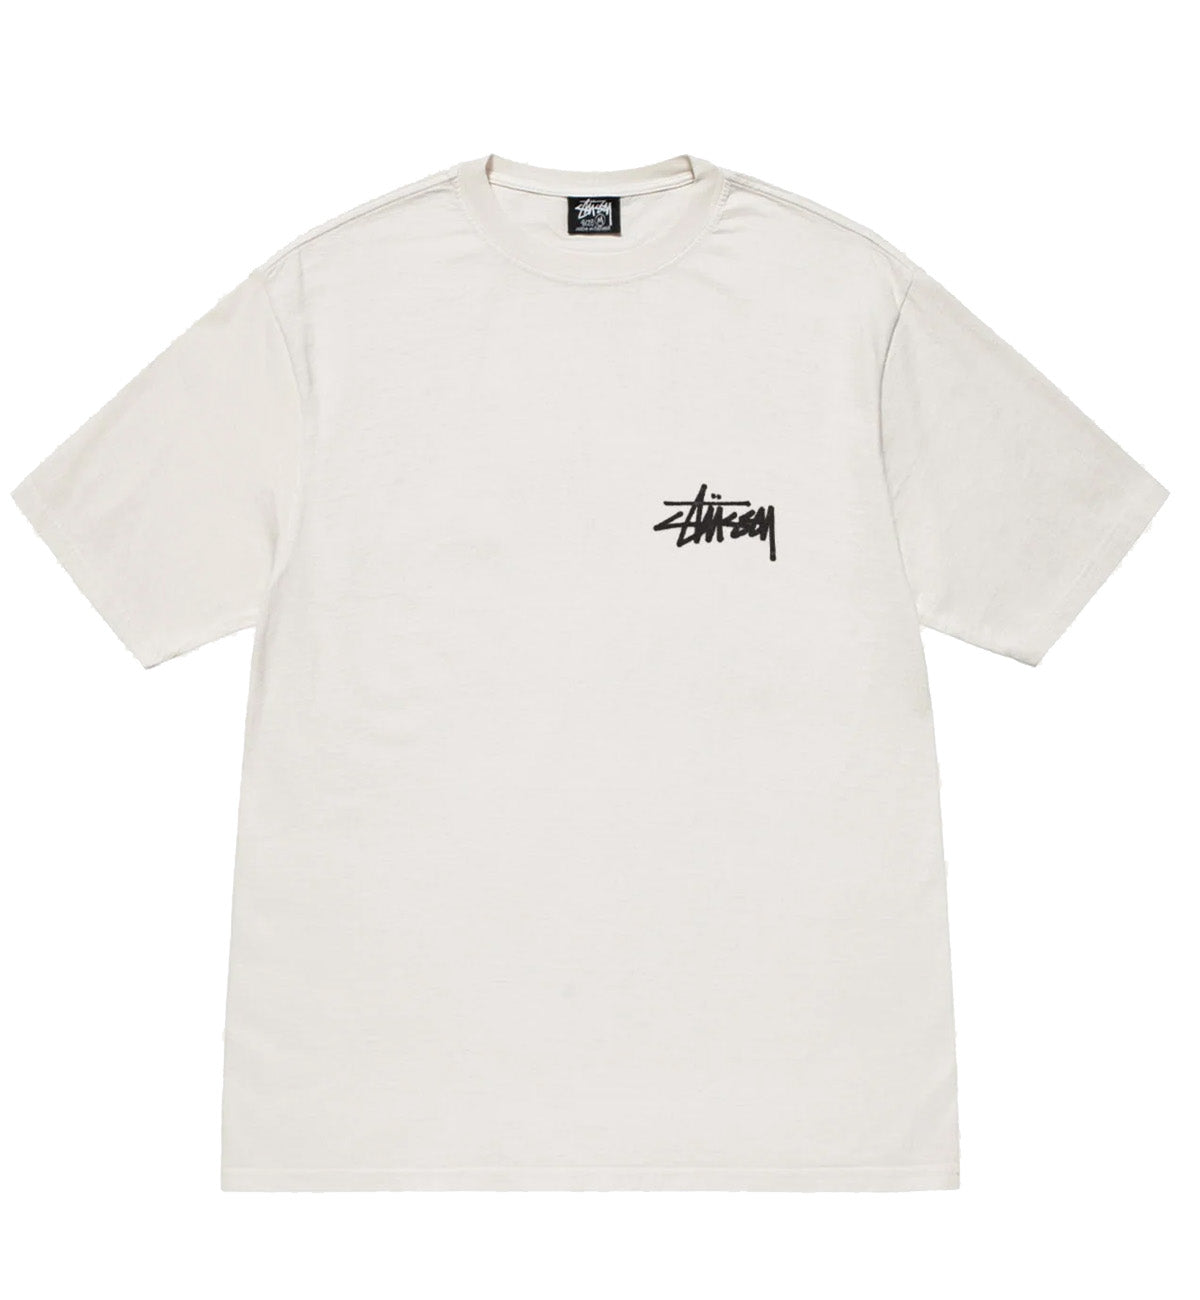 Stussy Old Phone Pig Dyed Tee (White)